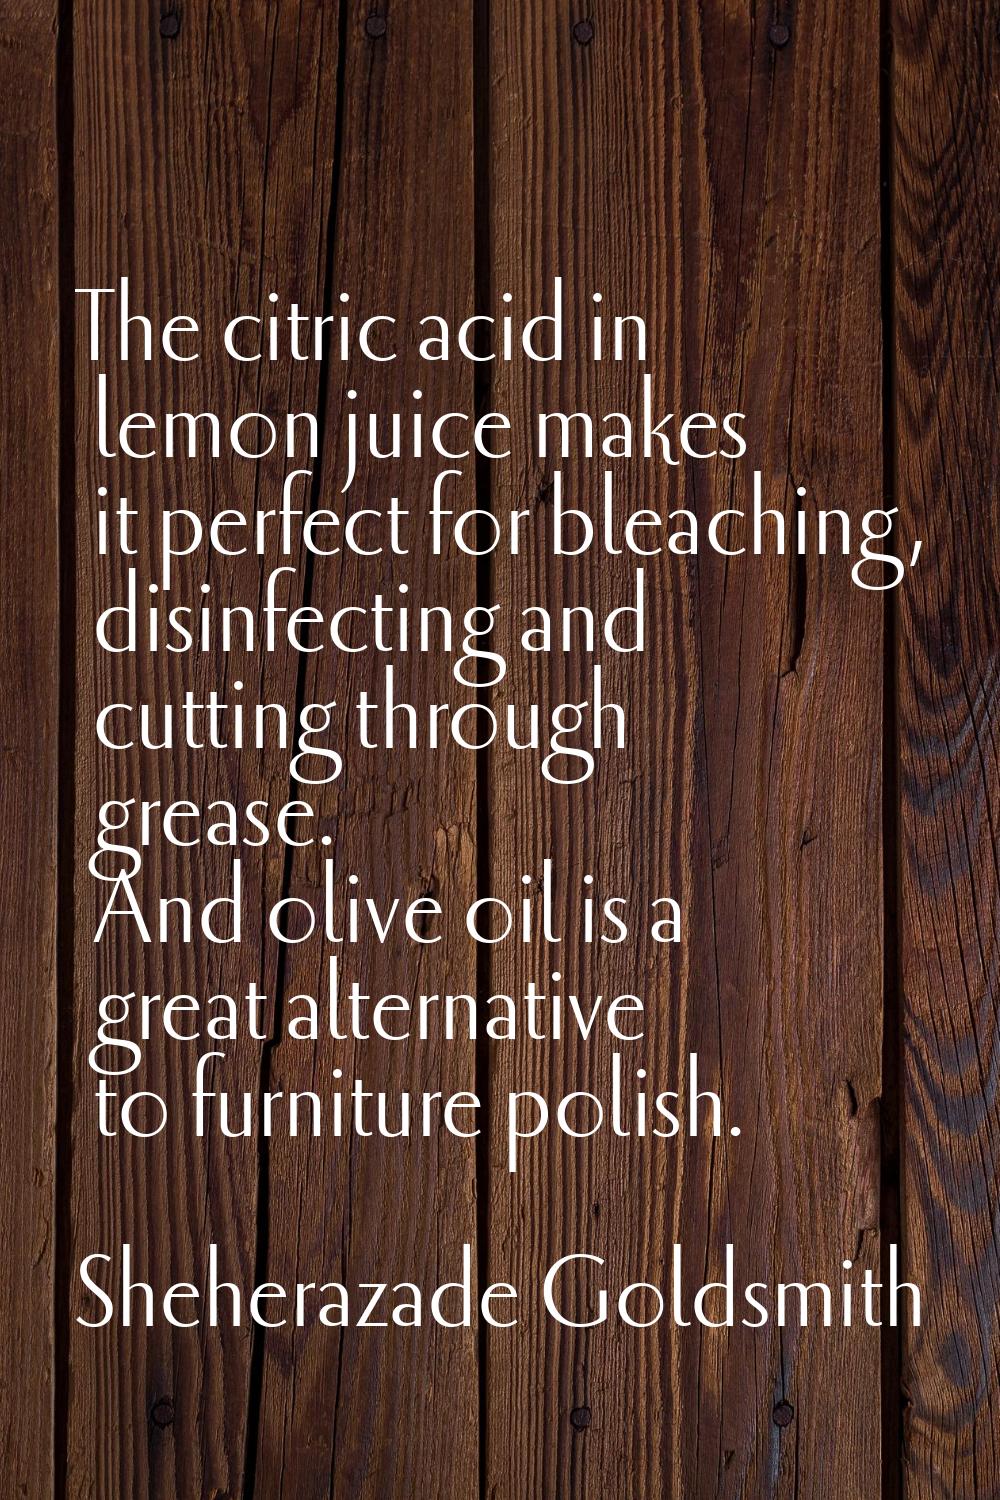 The citric acid in lemon juice makes it perfect for bleaching, disinfecting and cutting through gre